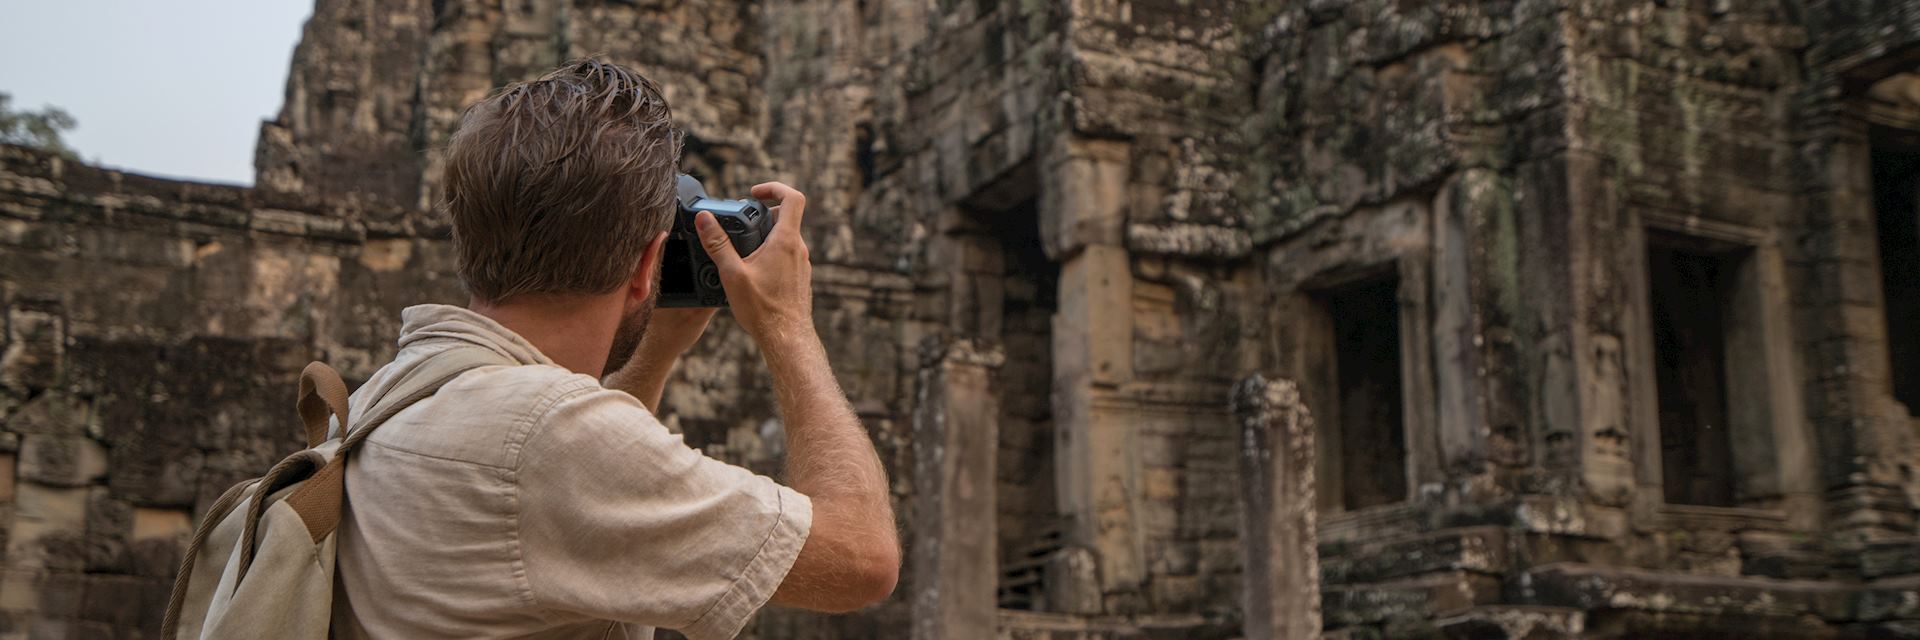 Photography at the Temples of Angkor